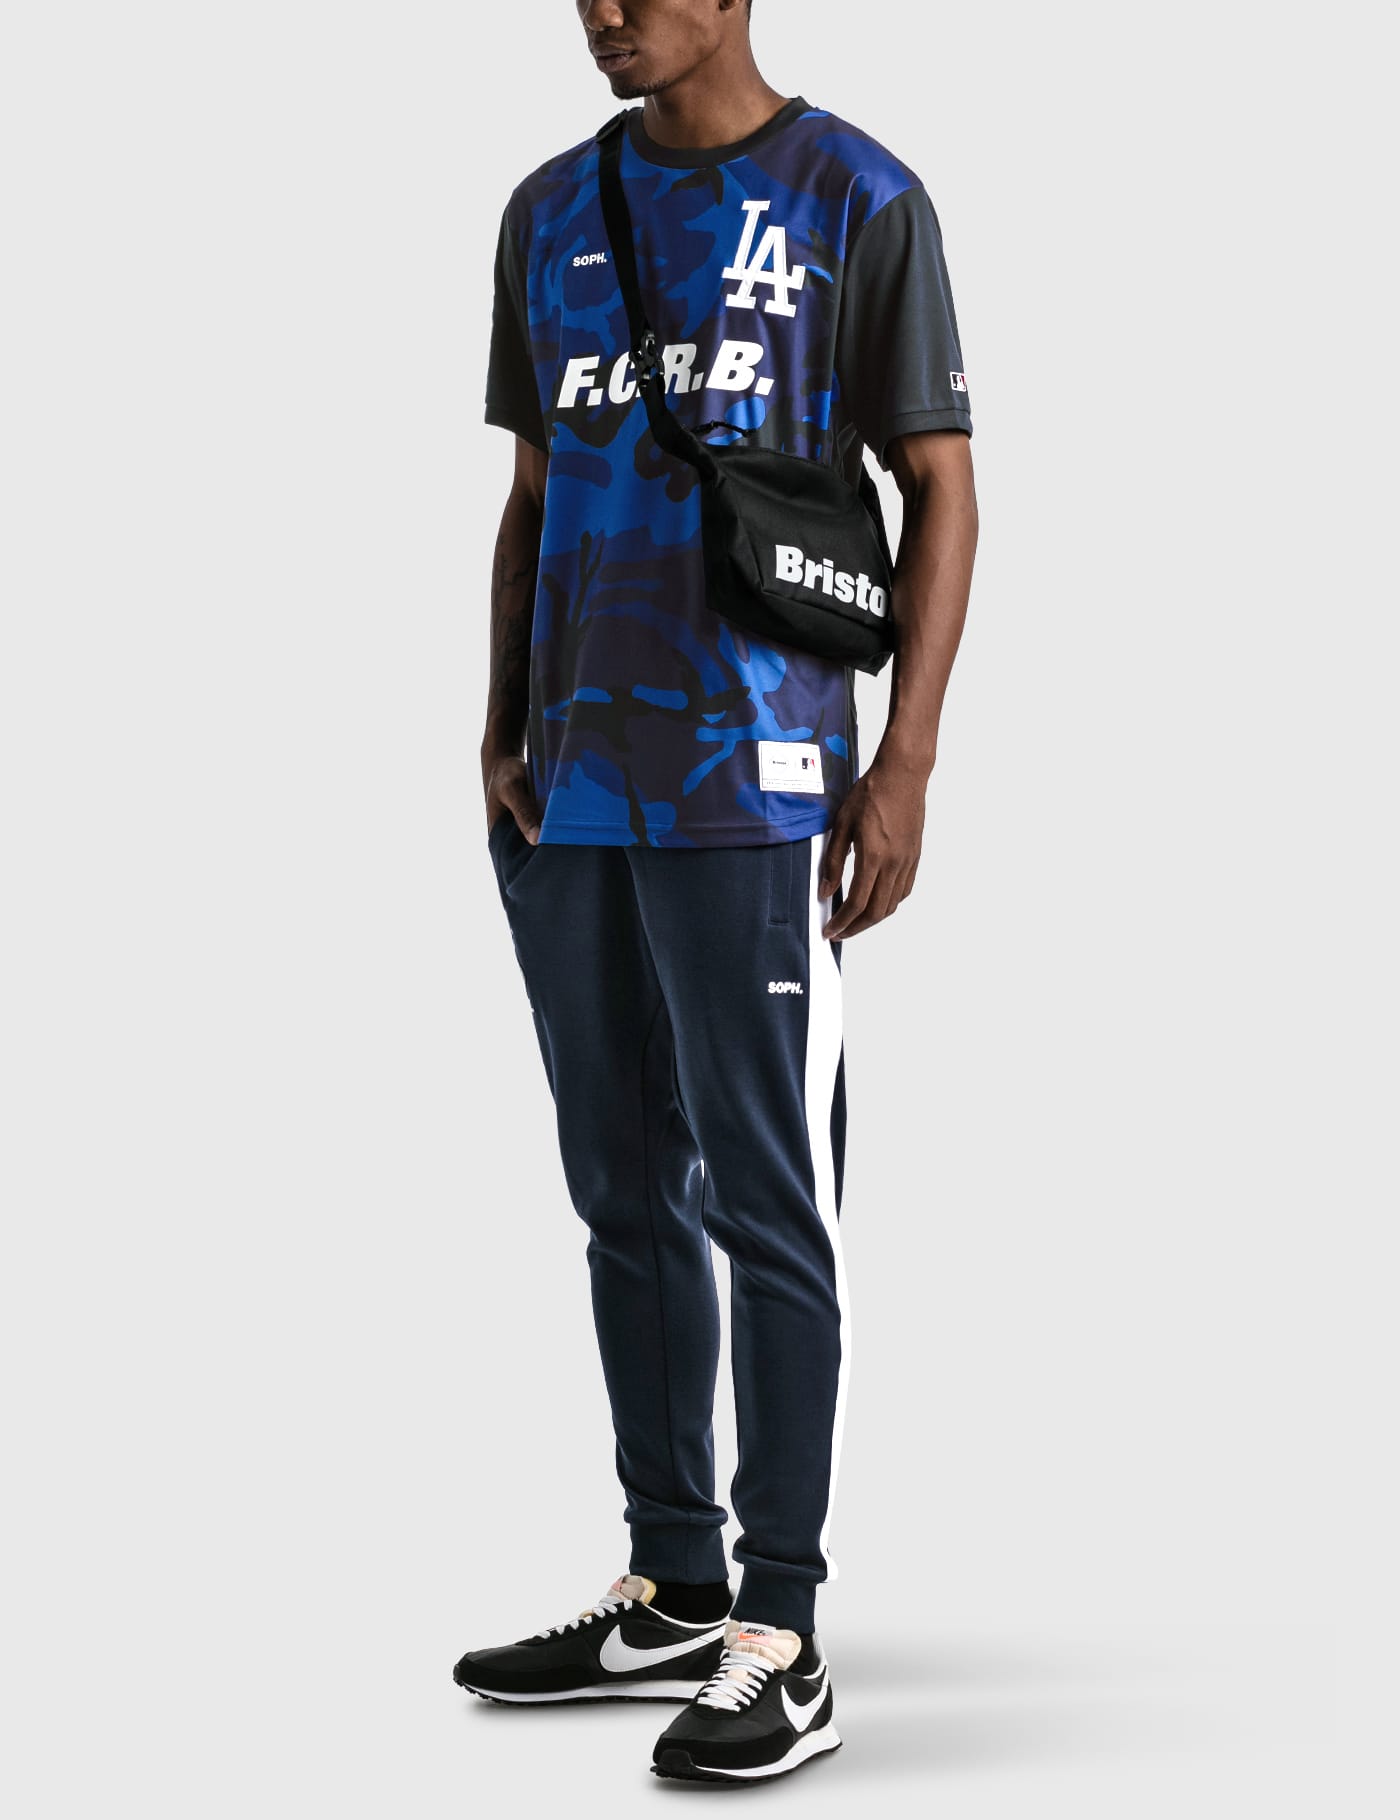 F.C. Real Bristol - MLB Tour Game Shirt | HBX - Globally Curated Fashion  and Lifestyle by Hypebeast